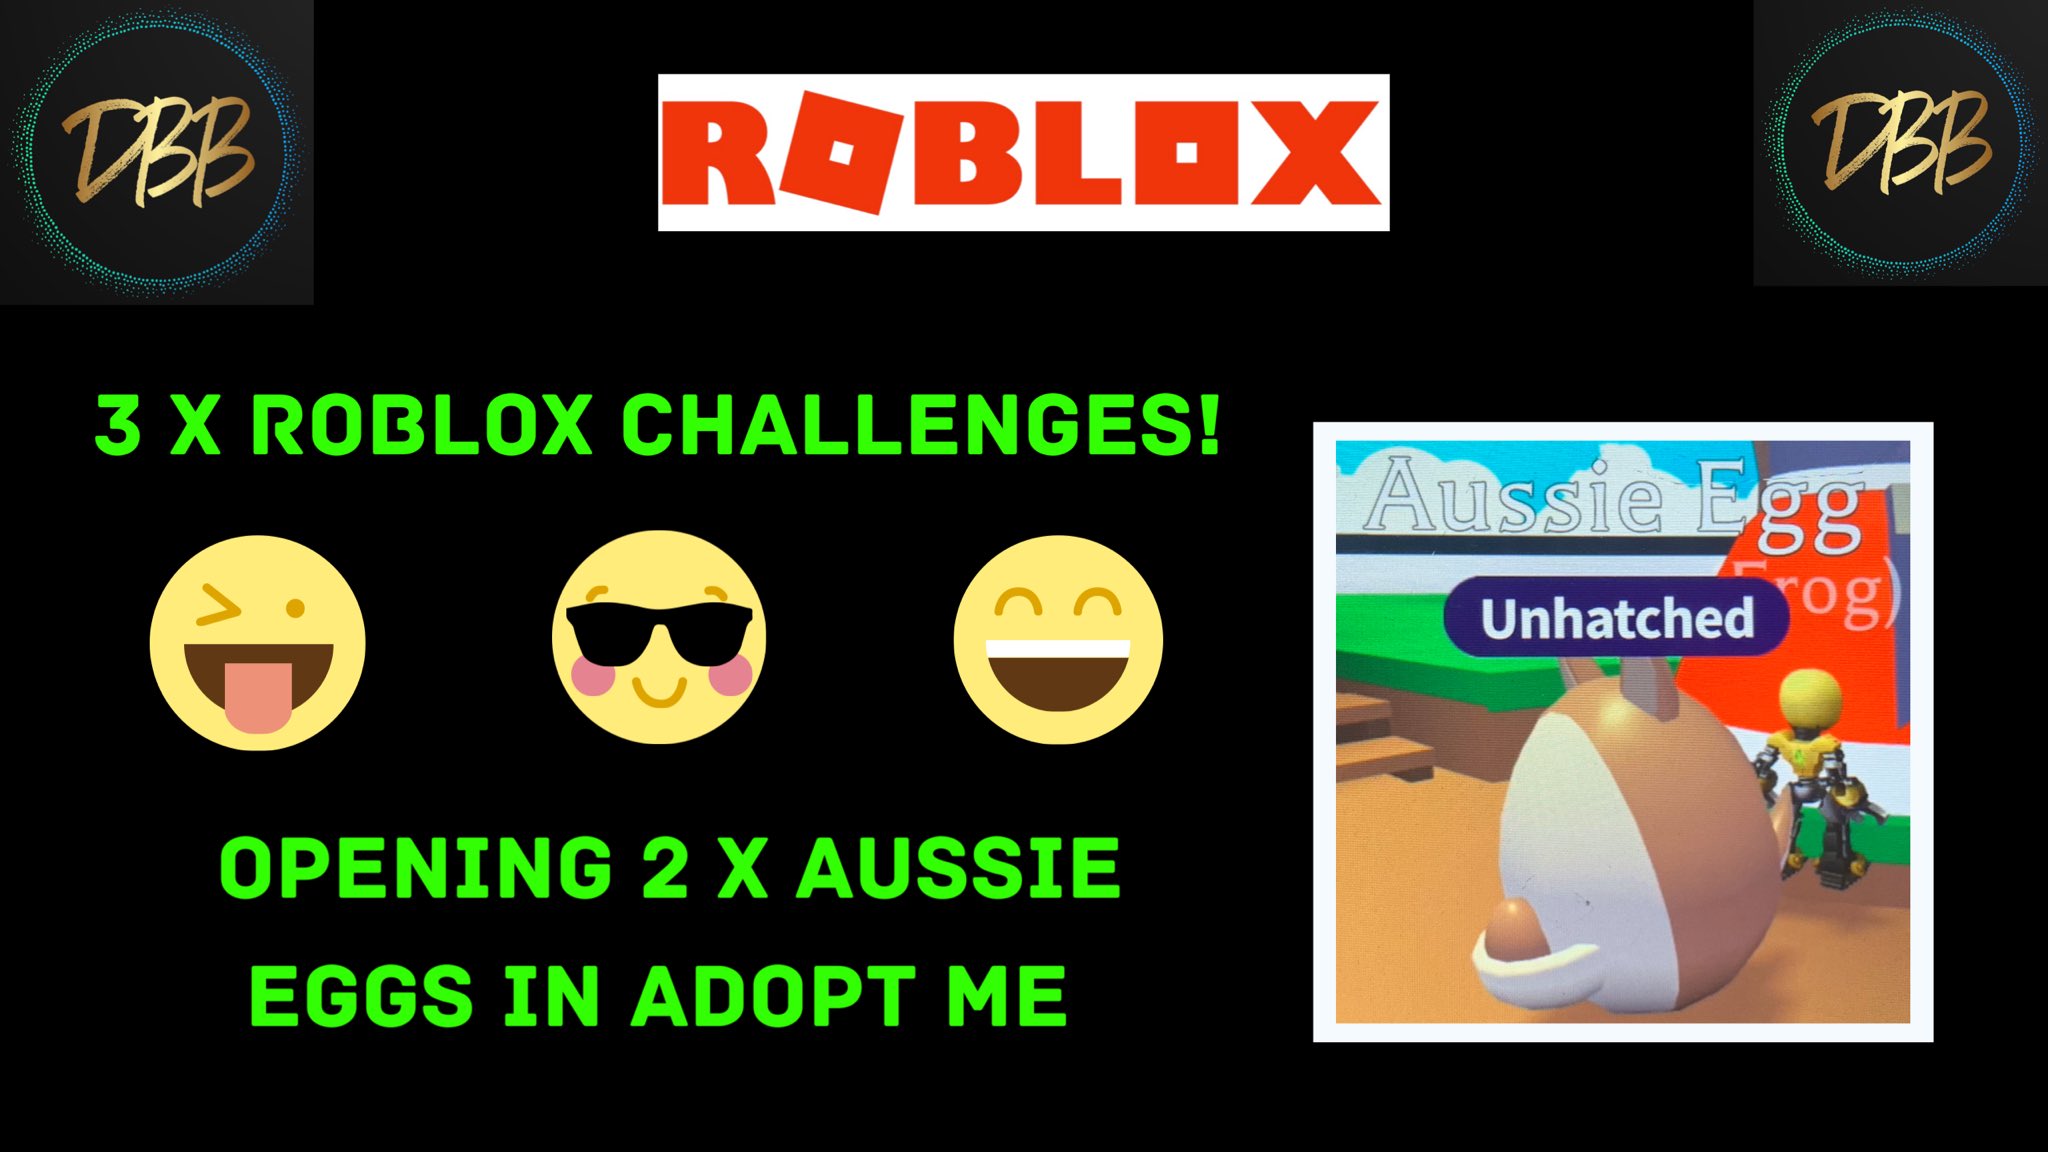 Deathbotbrothers On Twitter Roblox Opening 2 X Aussie Eggs In Adopt Me And 3 Of Your Roblox Challenges Https T Co Pkd23njfey Via Youtube Roblox Adoptme Robloxchallenges Robloxadoptme Aussieeggs Https T Co Izq9qfqjbu - dbb logo roblox